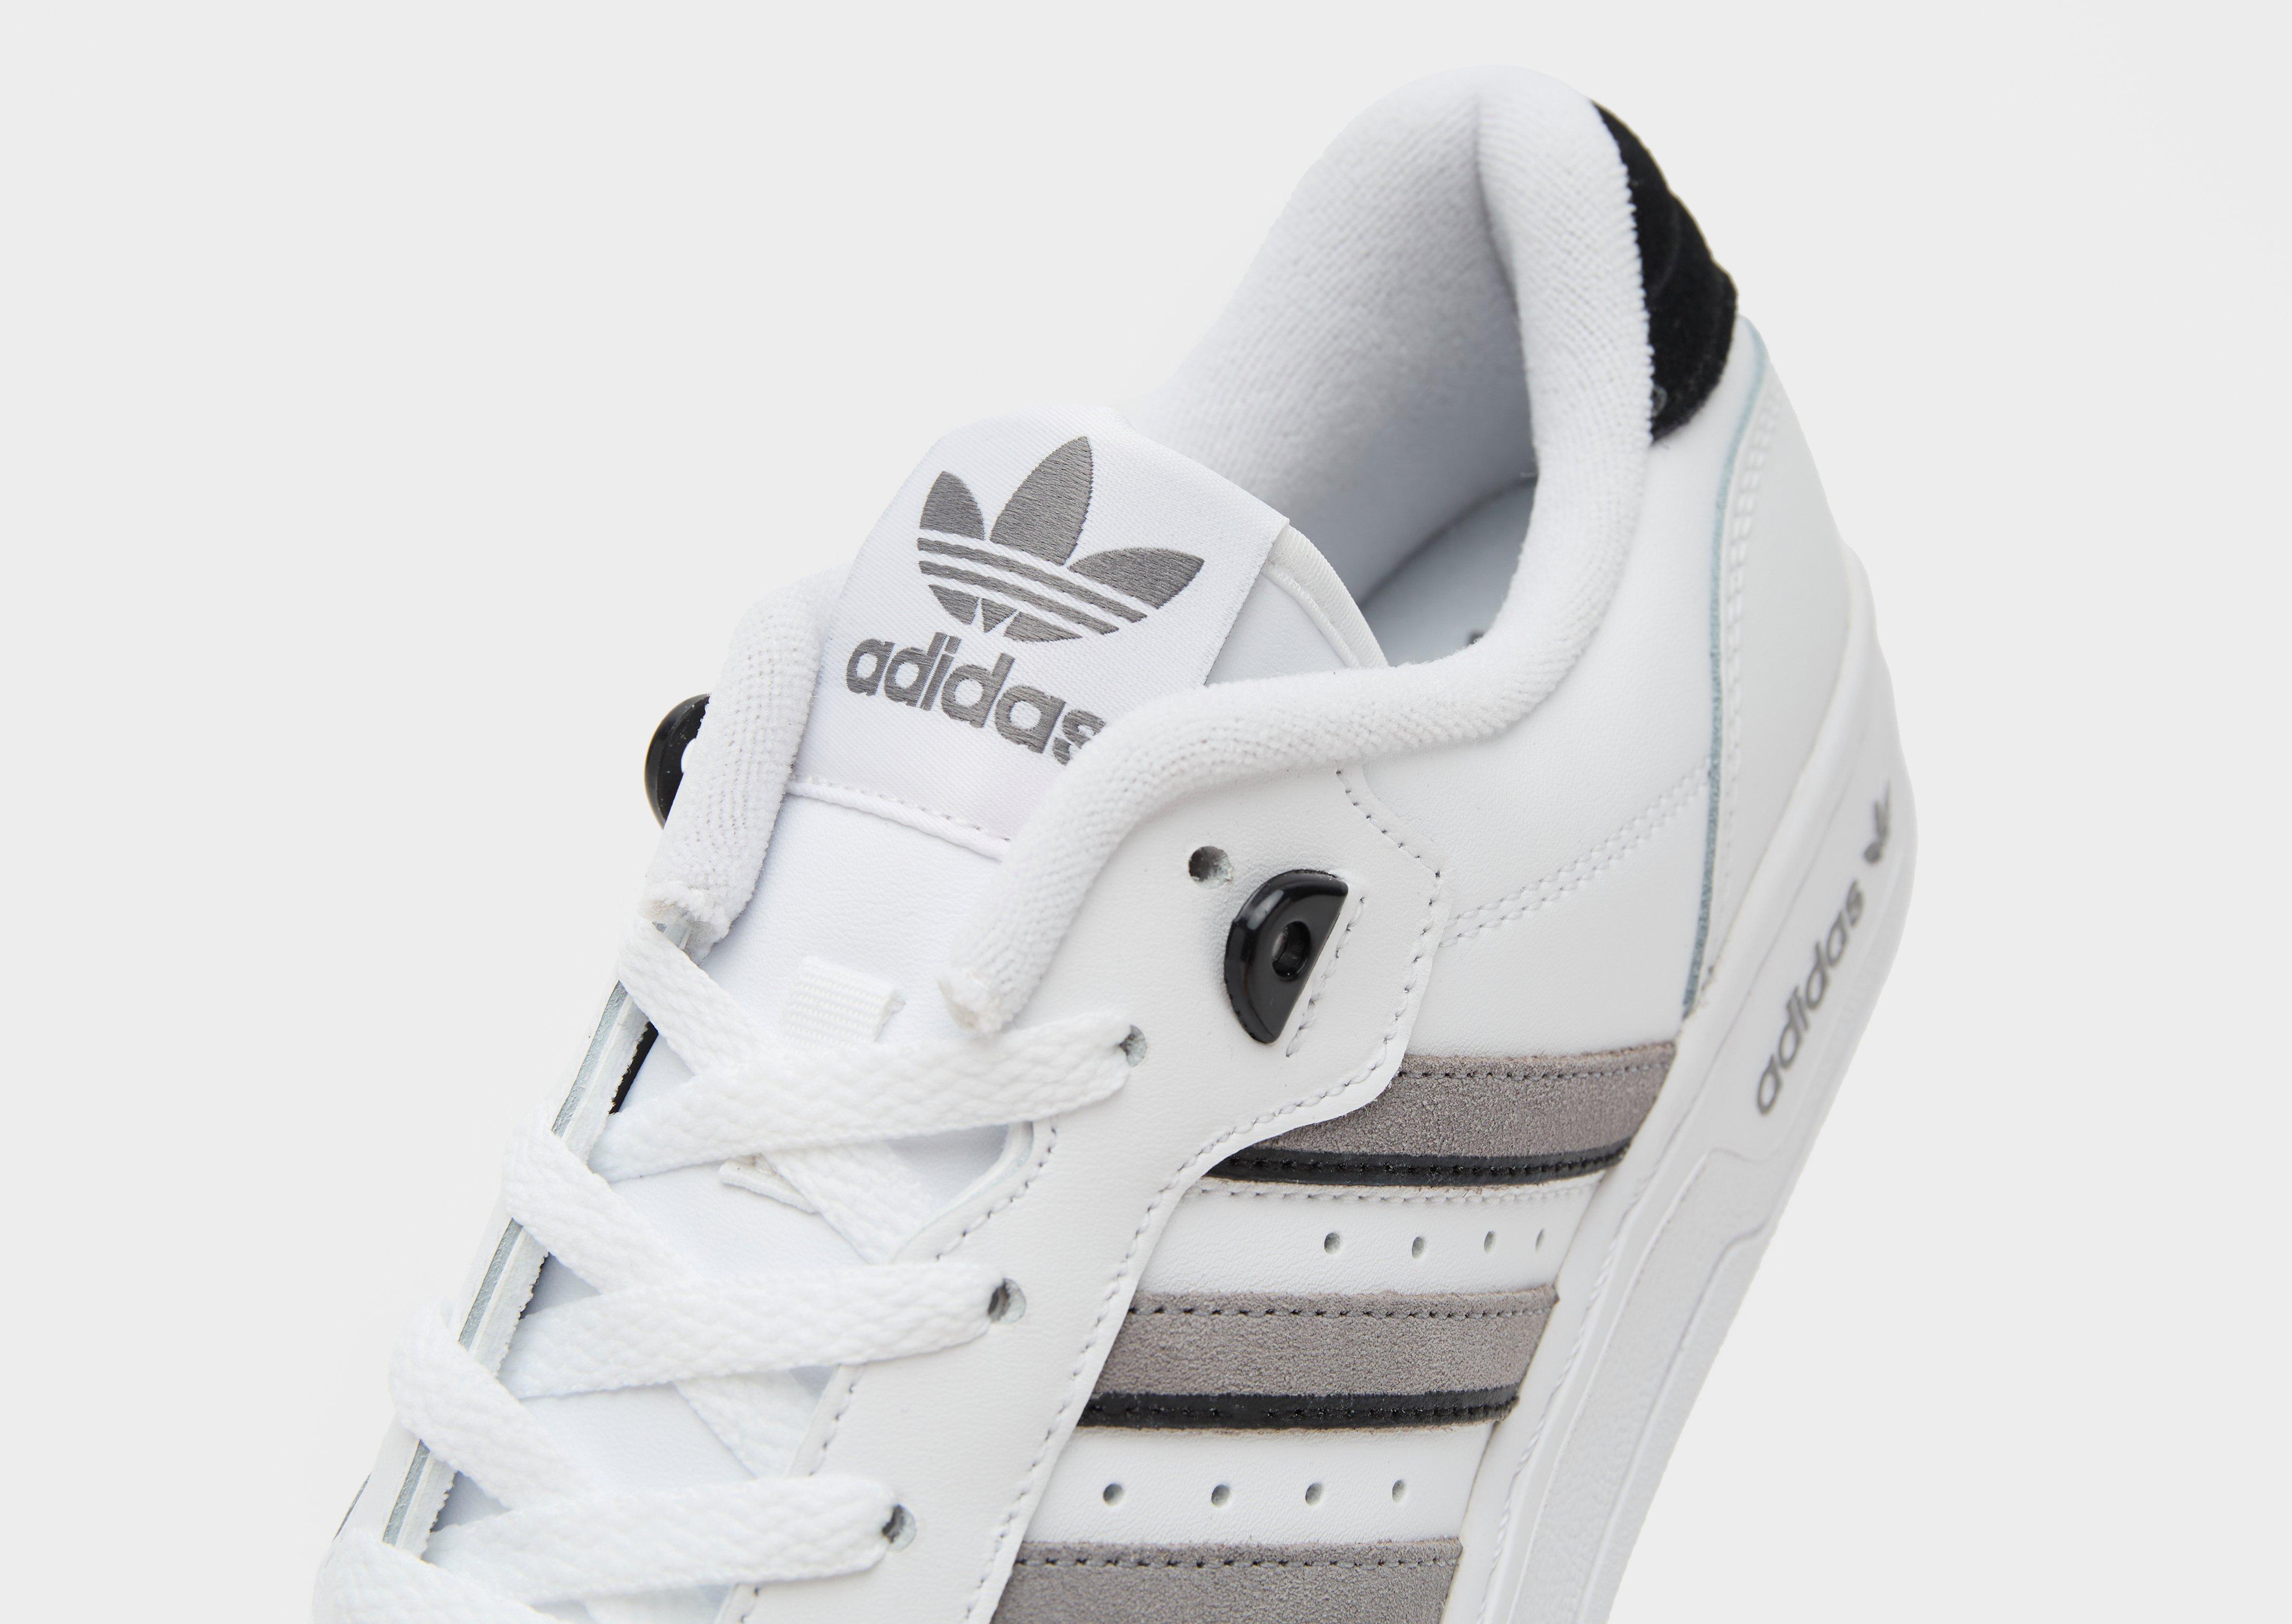 Baskets Rivalry Low - adidas Originals - Homme - Blanc - Cuir Blanc -  721662 - Cdiscount Chaussures